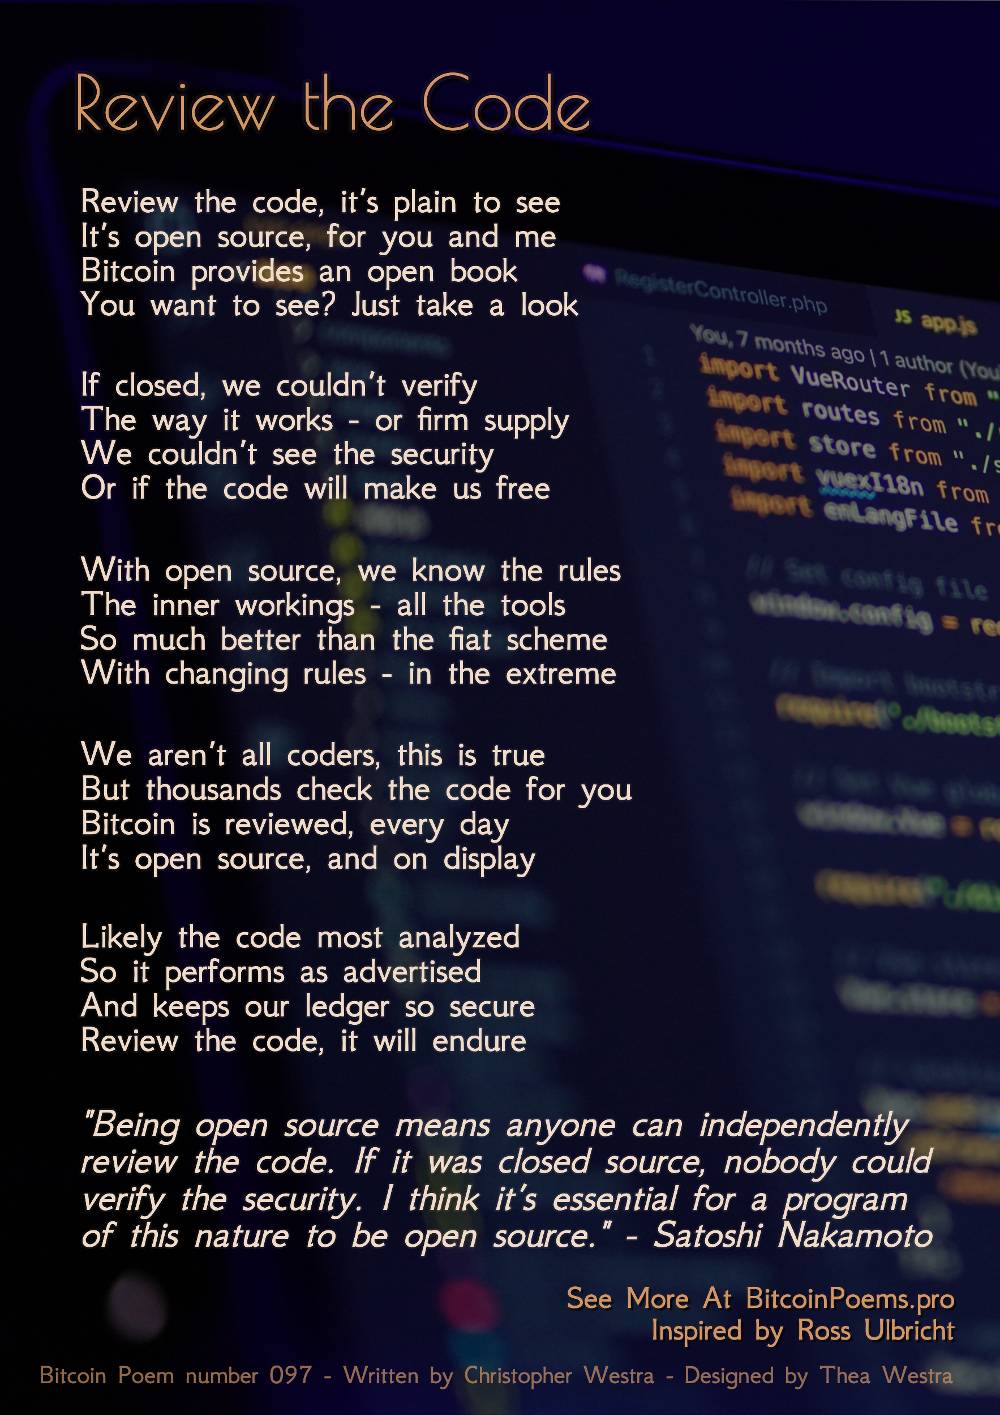 Review the Code - Bitcoin Poem 097 by Christopher Westra